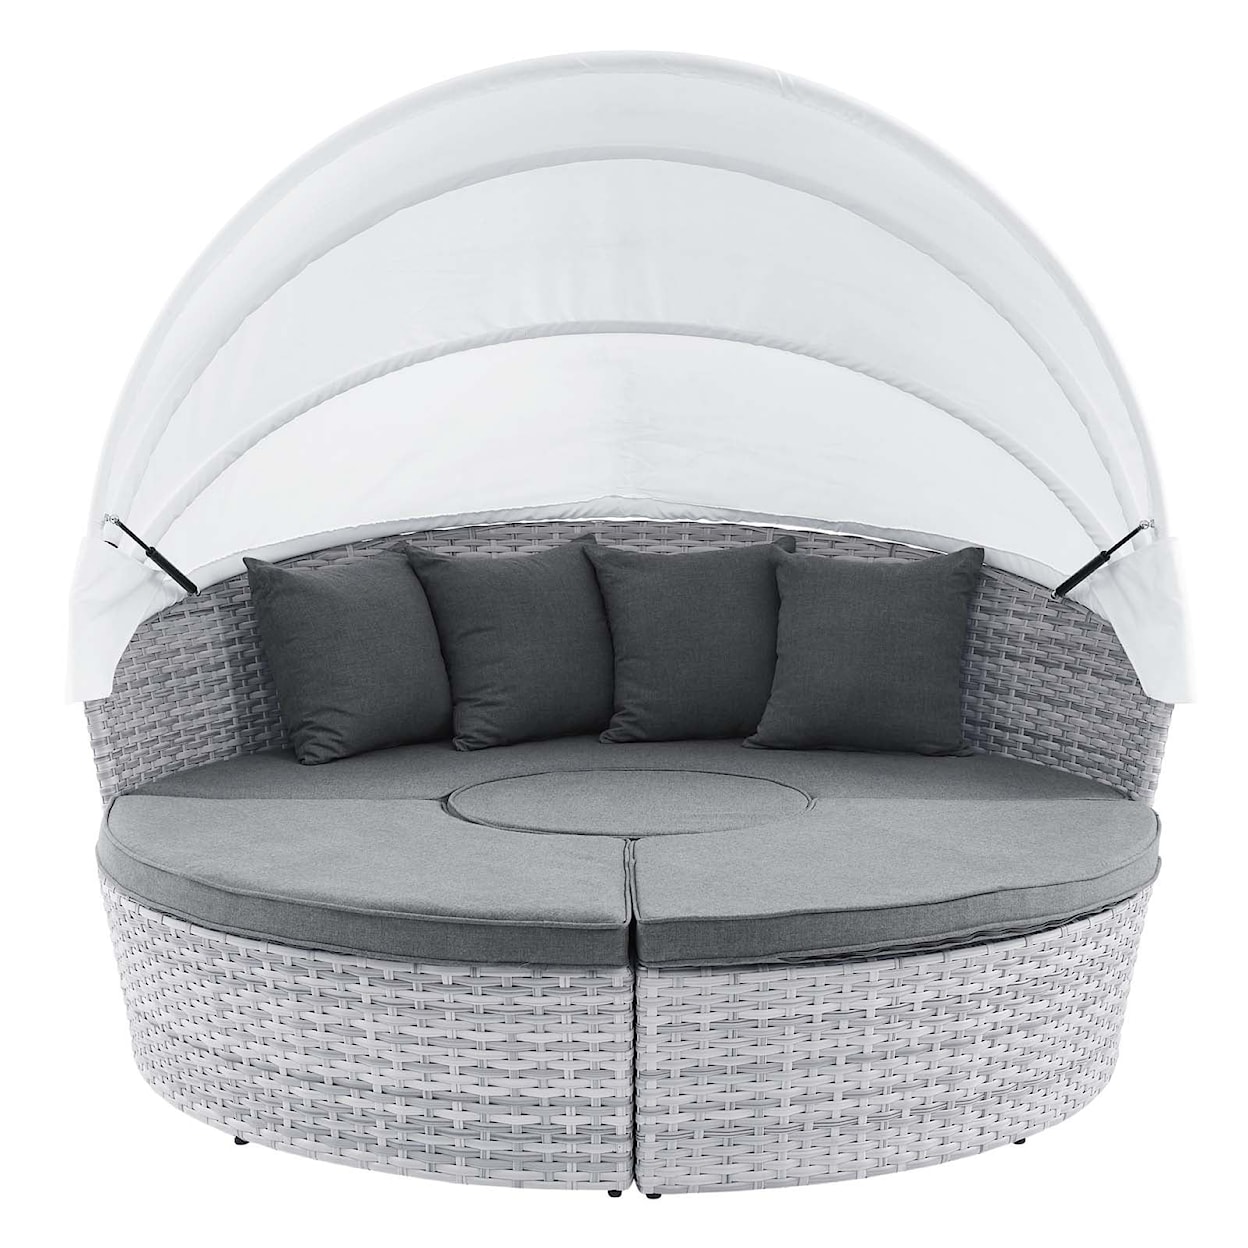 Modway Scottsdale Scottsdale Outdoor Patio Daybed